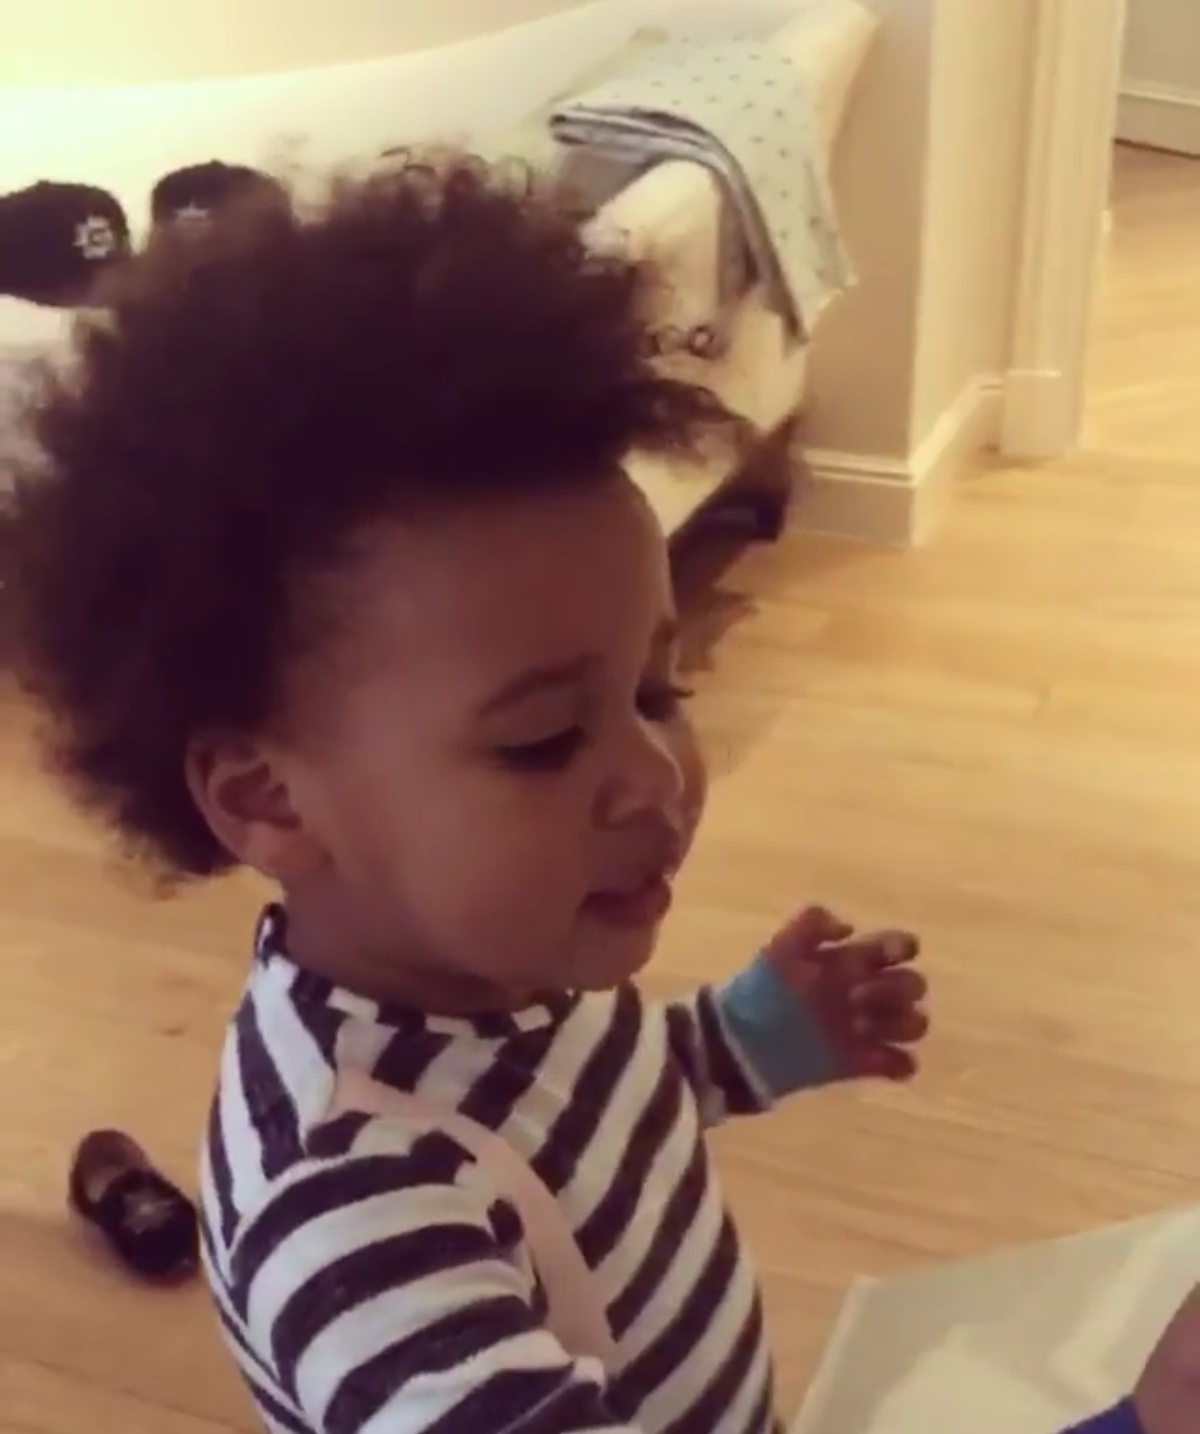 Mikel Obi Shares Adorable Video Of His Daughter Uttering Her First Words 2